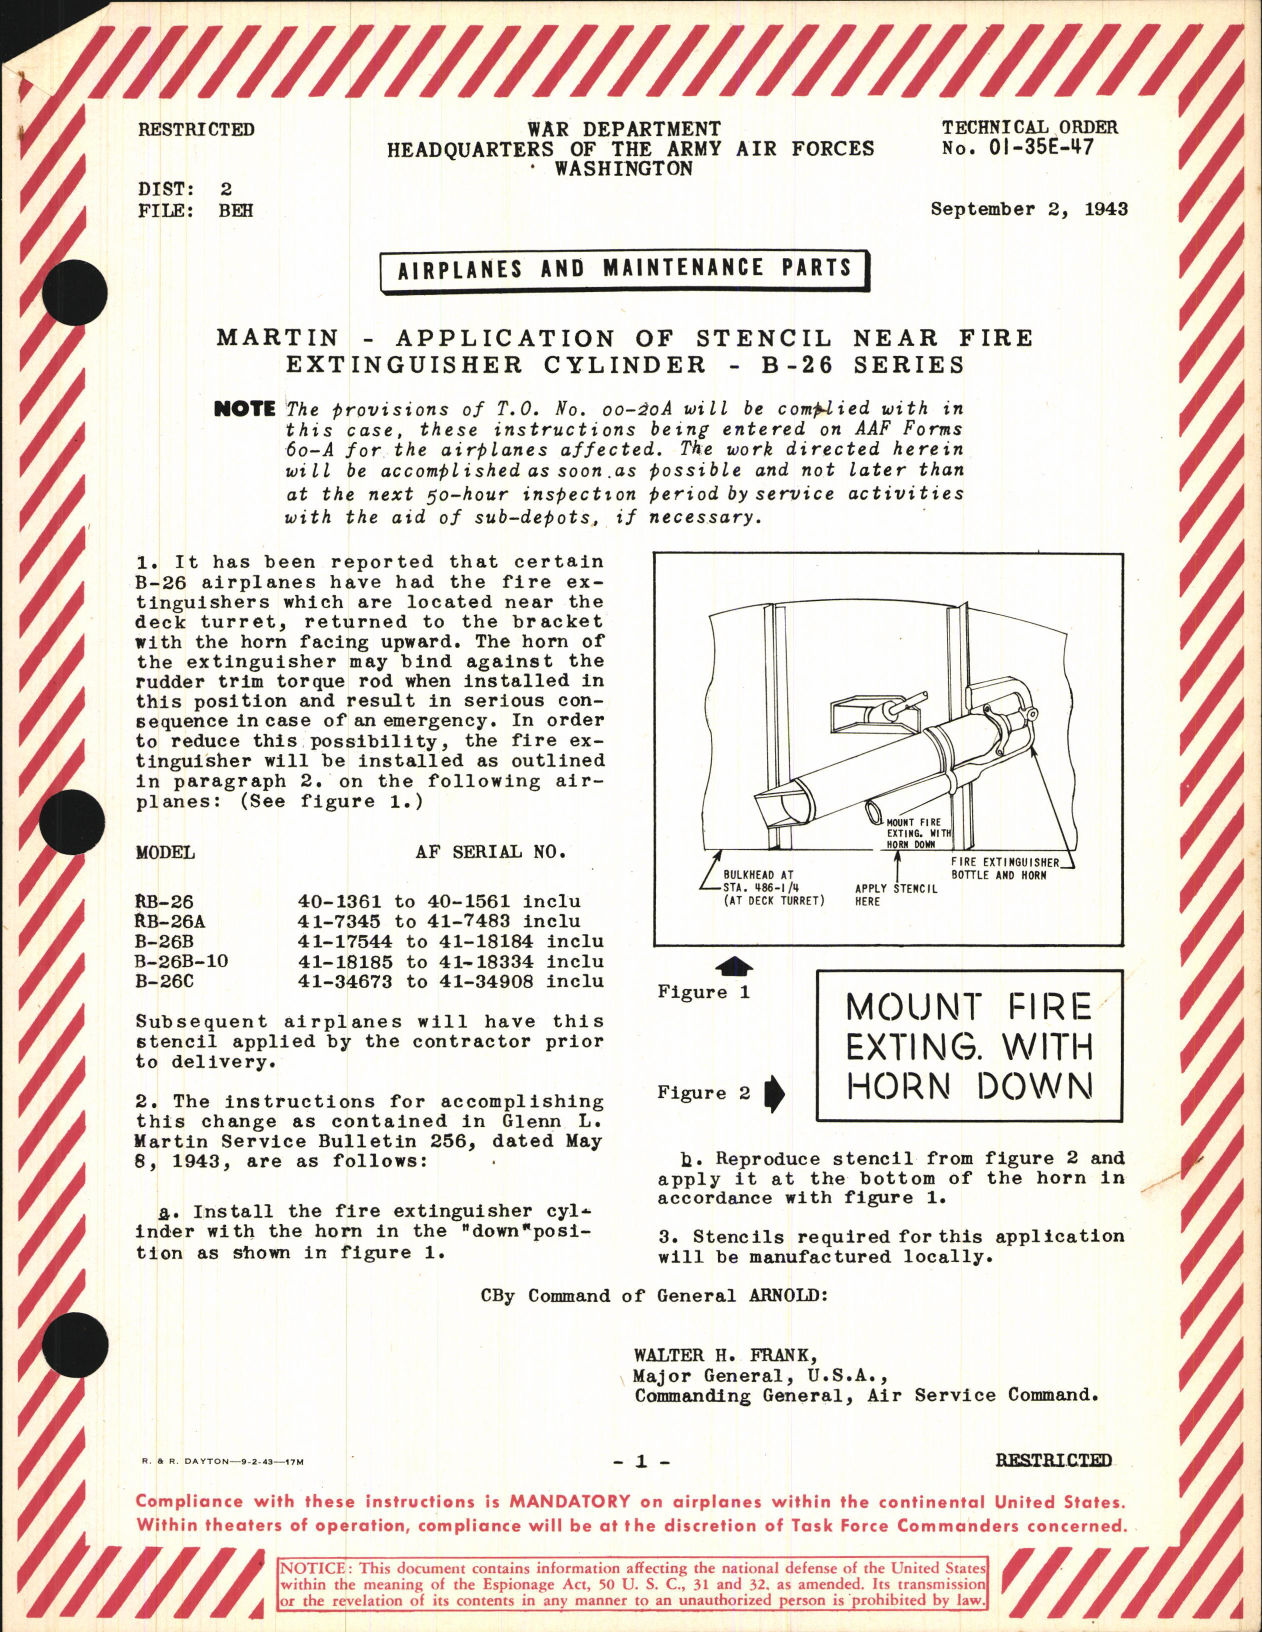 Sample page 1 from AirCorps Library document: Application of Stencil Near Fire Extinguisher Cylinder for B-26 Series